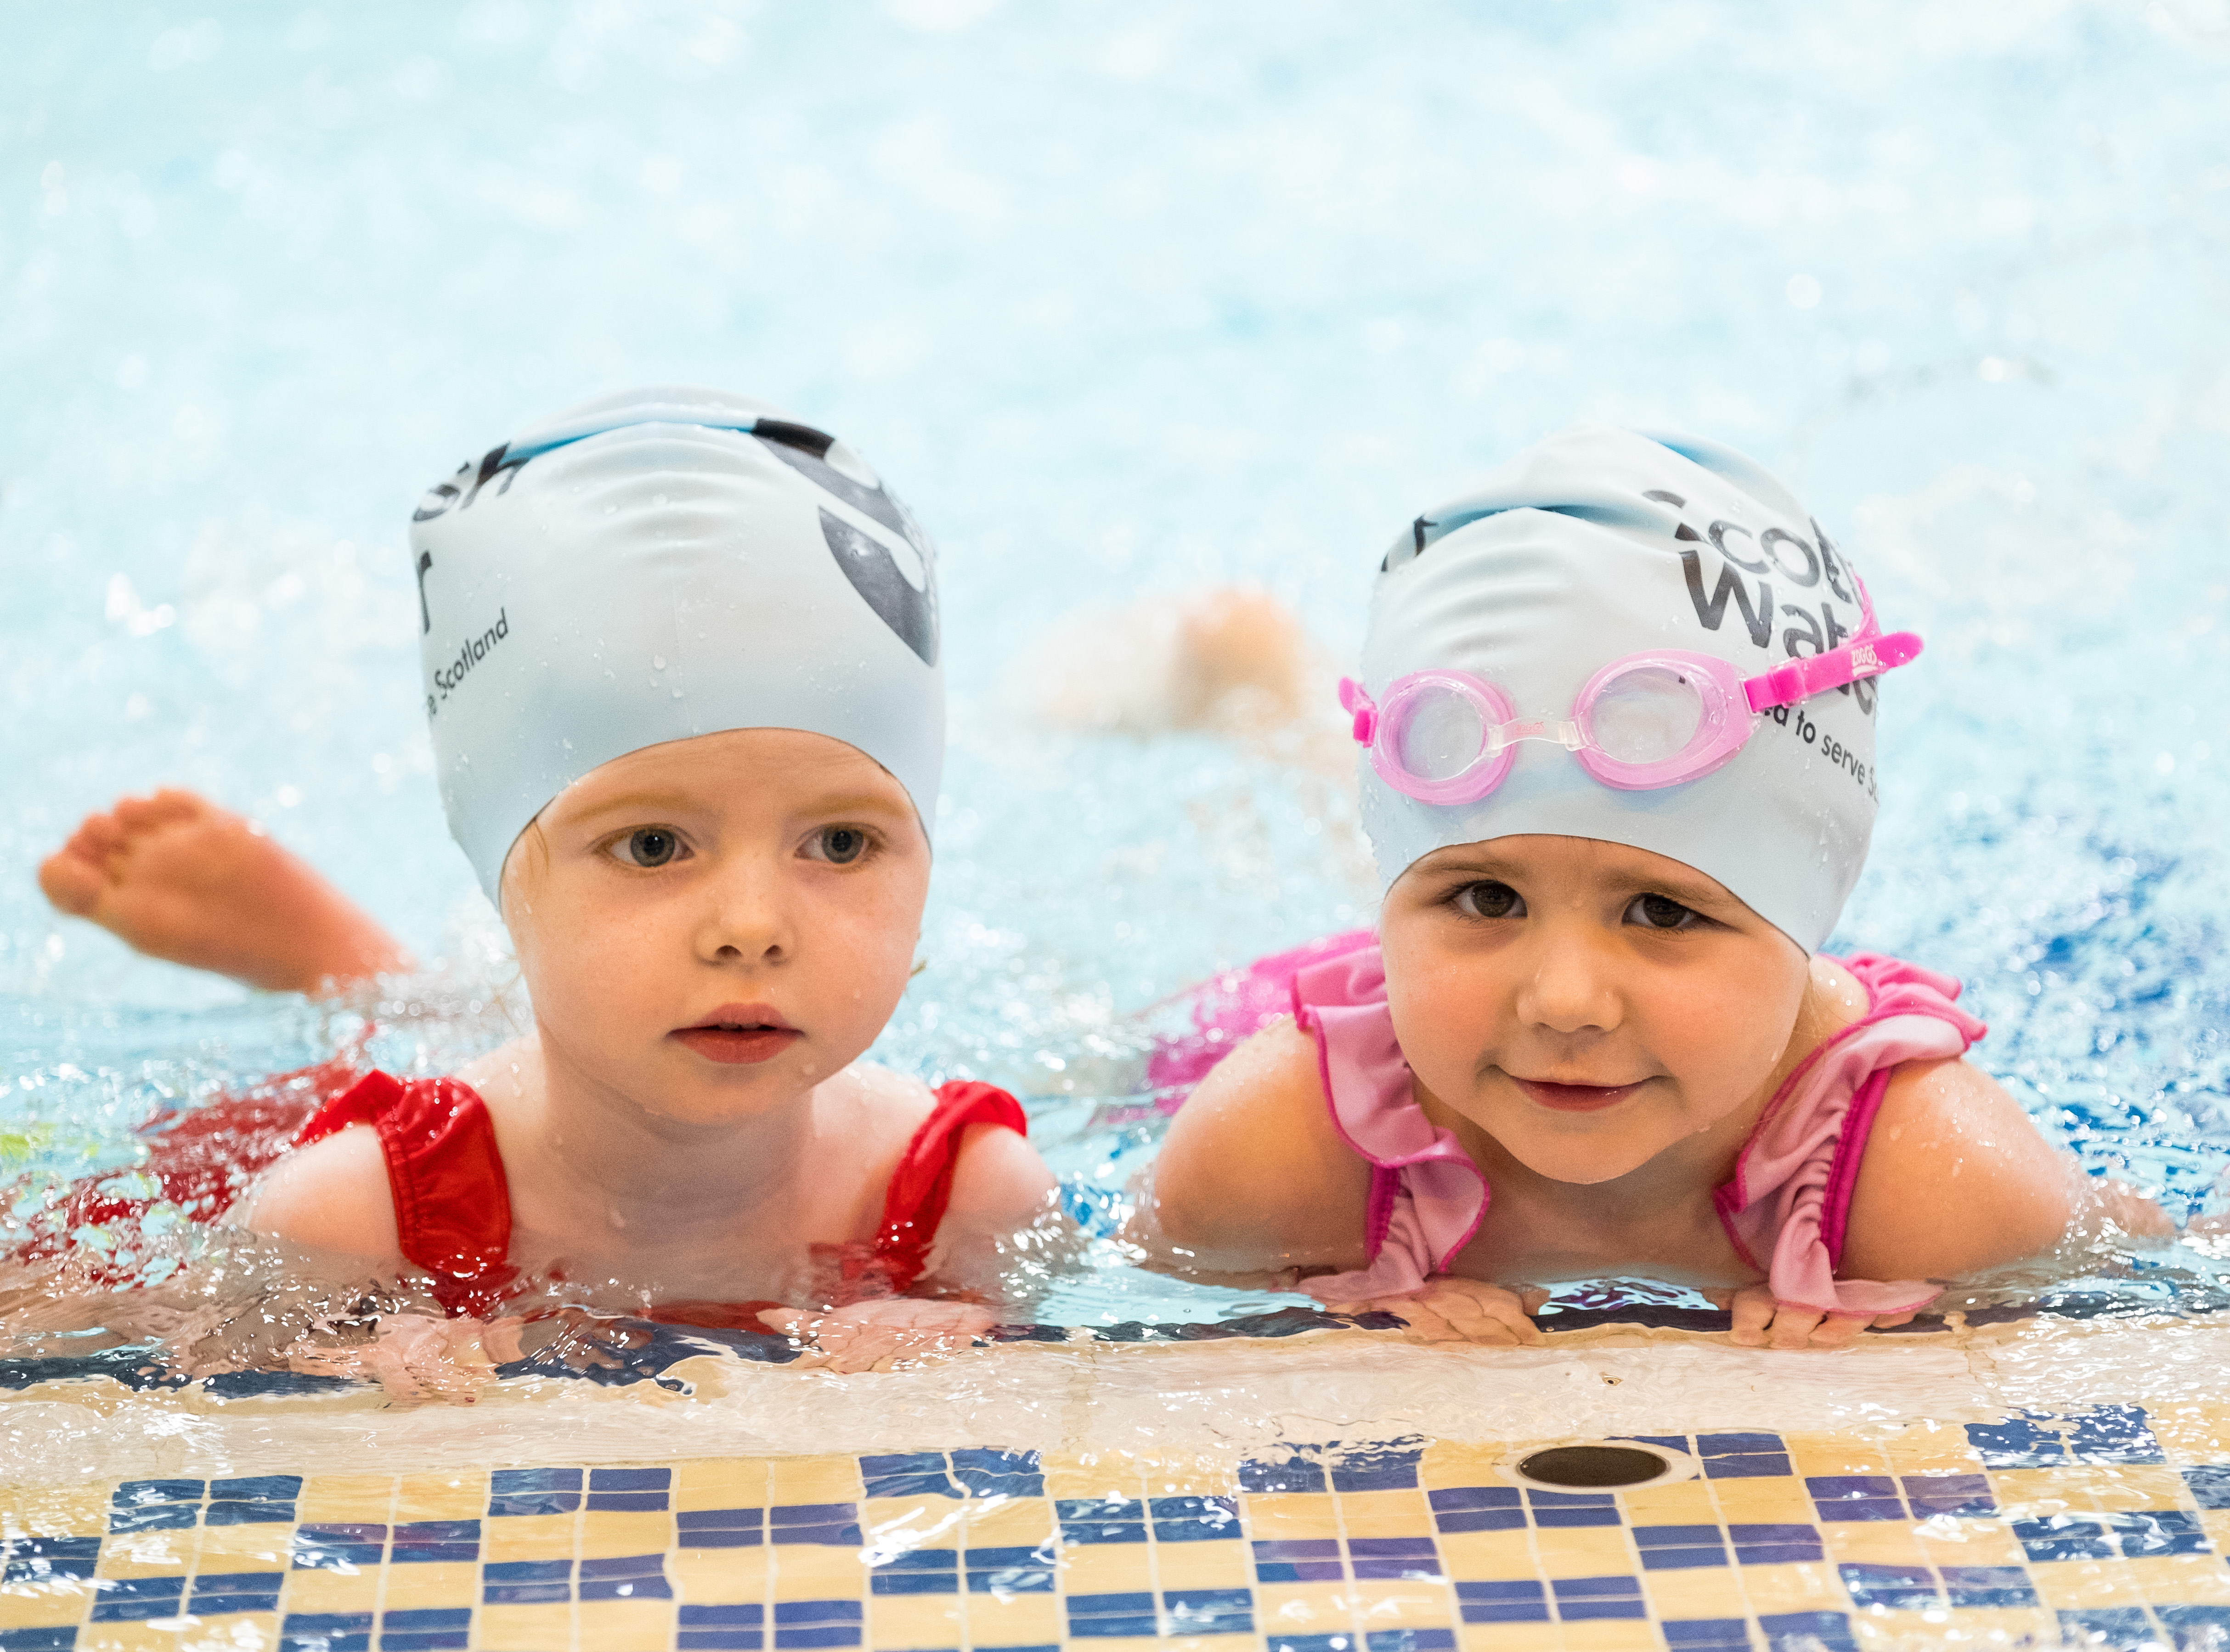 Scottish Water Learn-To-Swim Partnership Launch - Tollcross International Swimming Pool - Glasgow. Picture Shows;  young swimmers at the launch event, Wednesday 21 February 2018.

©Stuart Nicol Photography, 2018